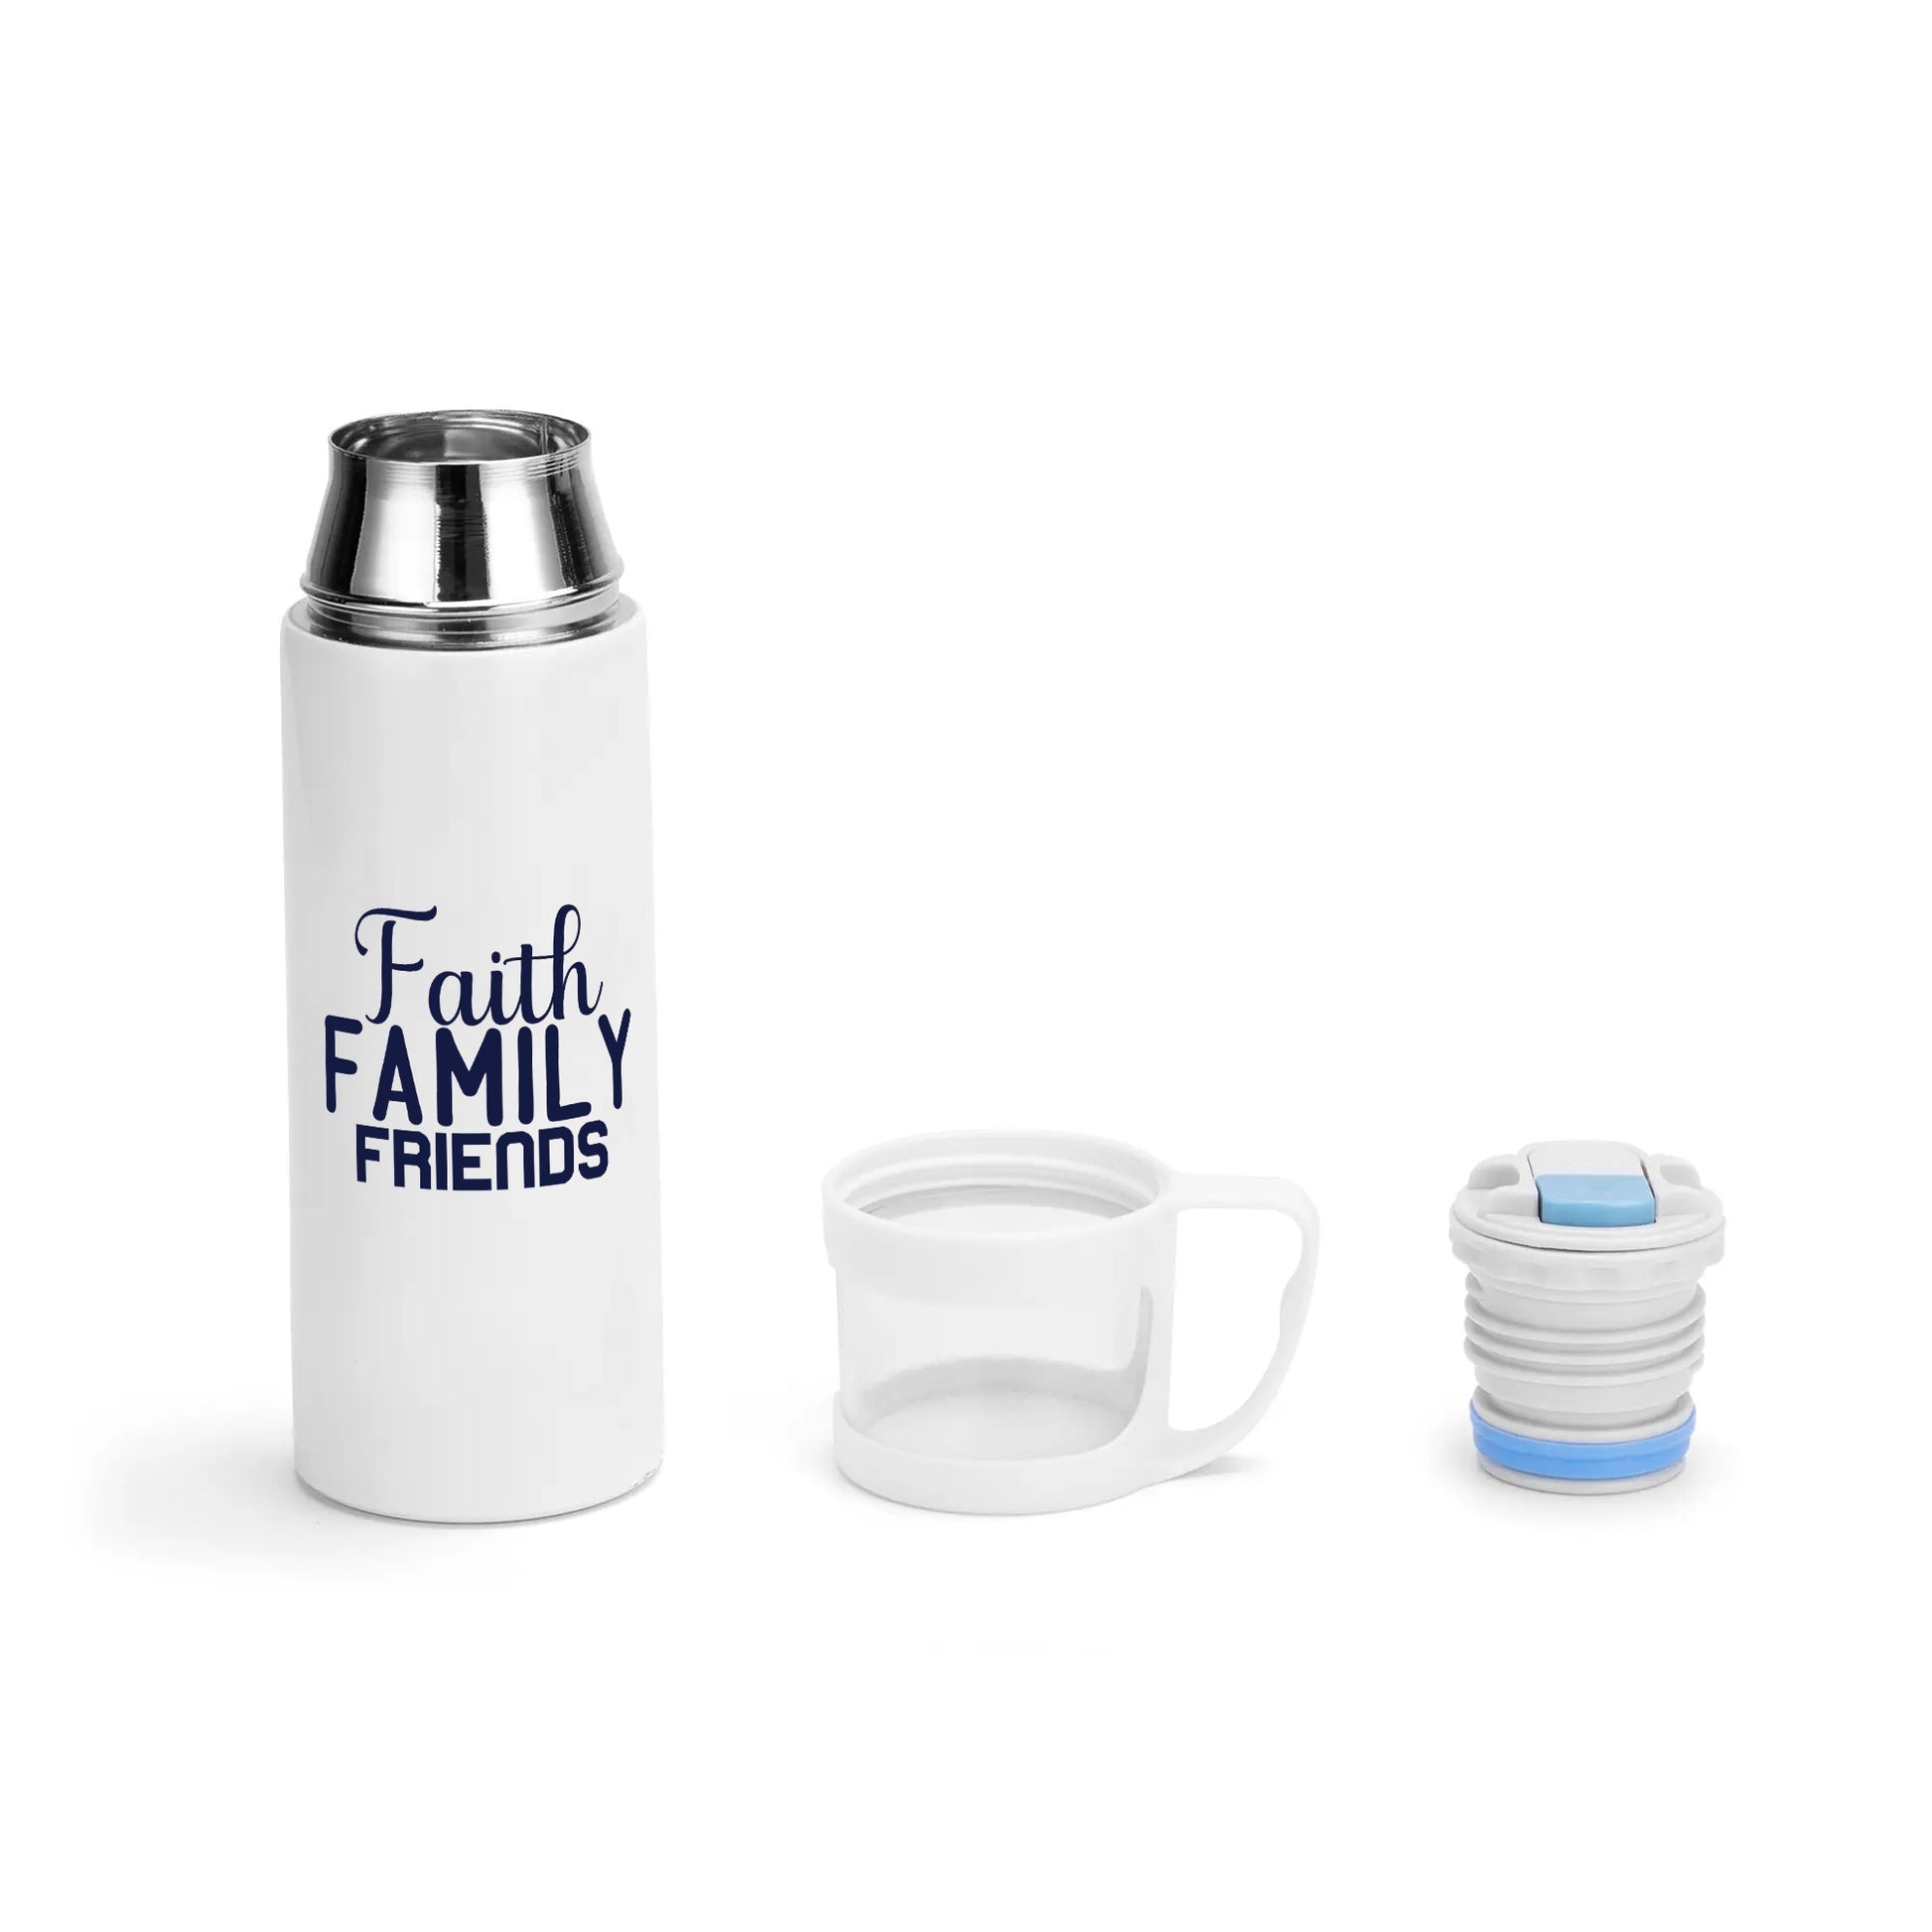 Faith Family Friends Vacuum Bottle with Cup popcustoms